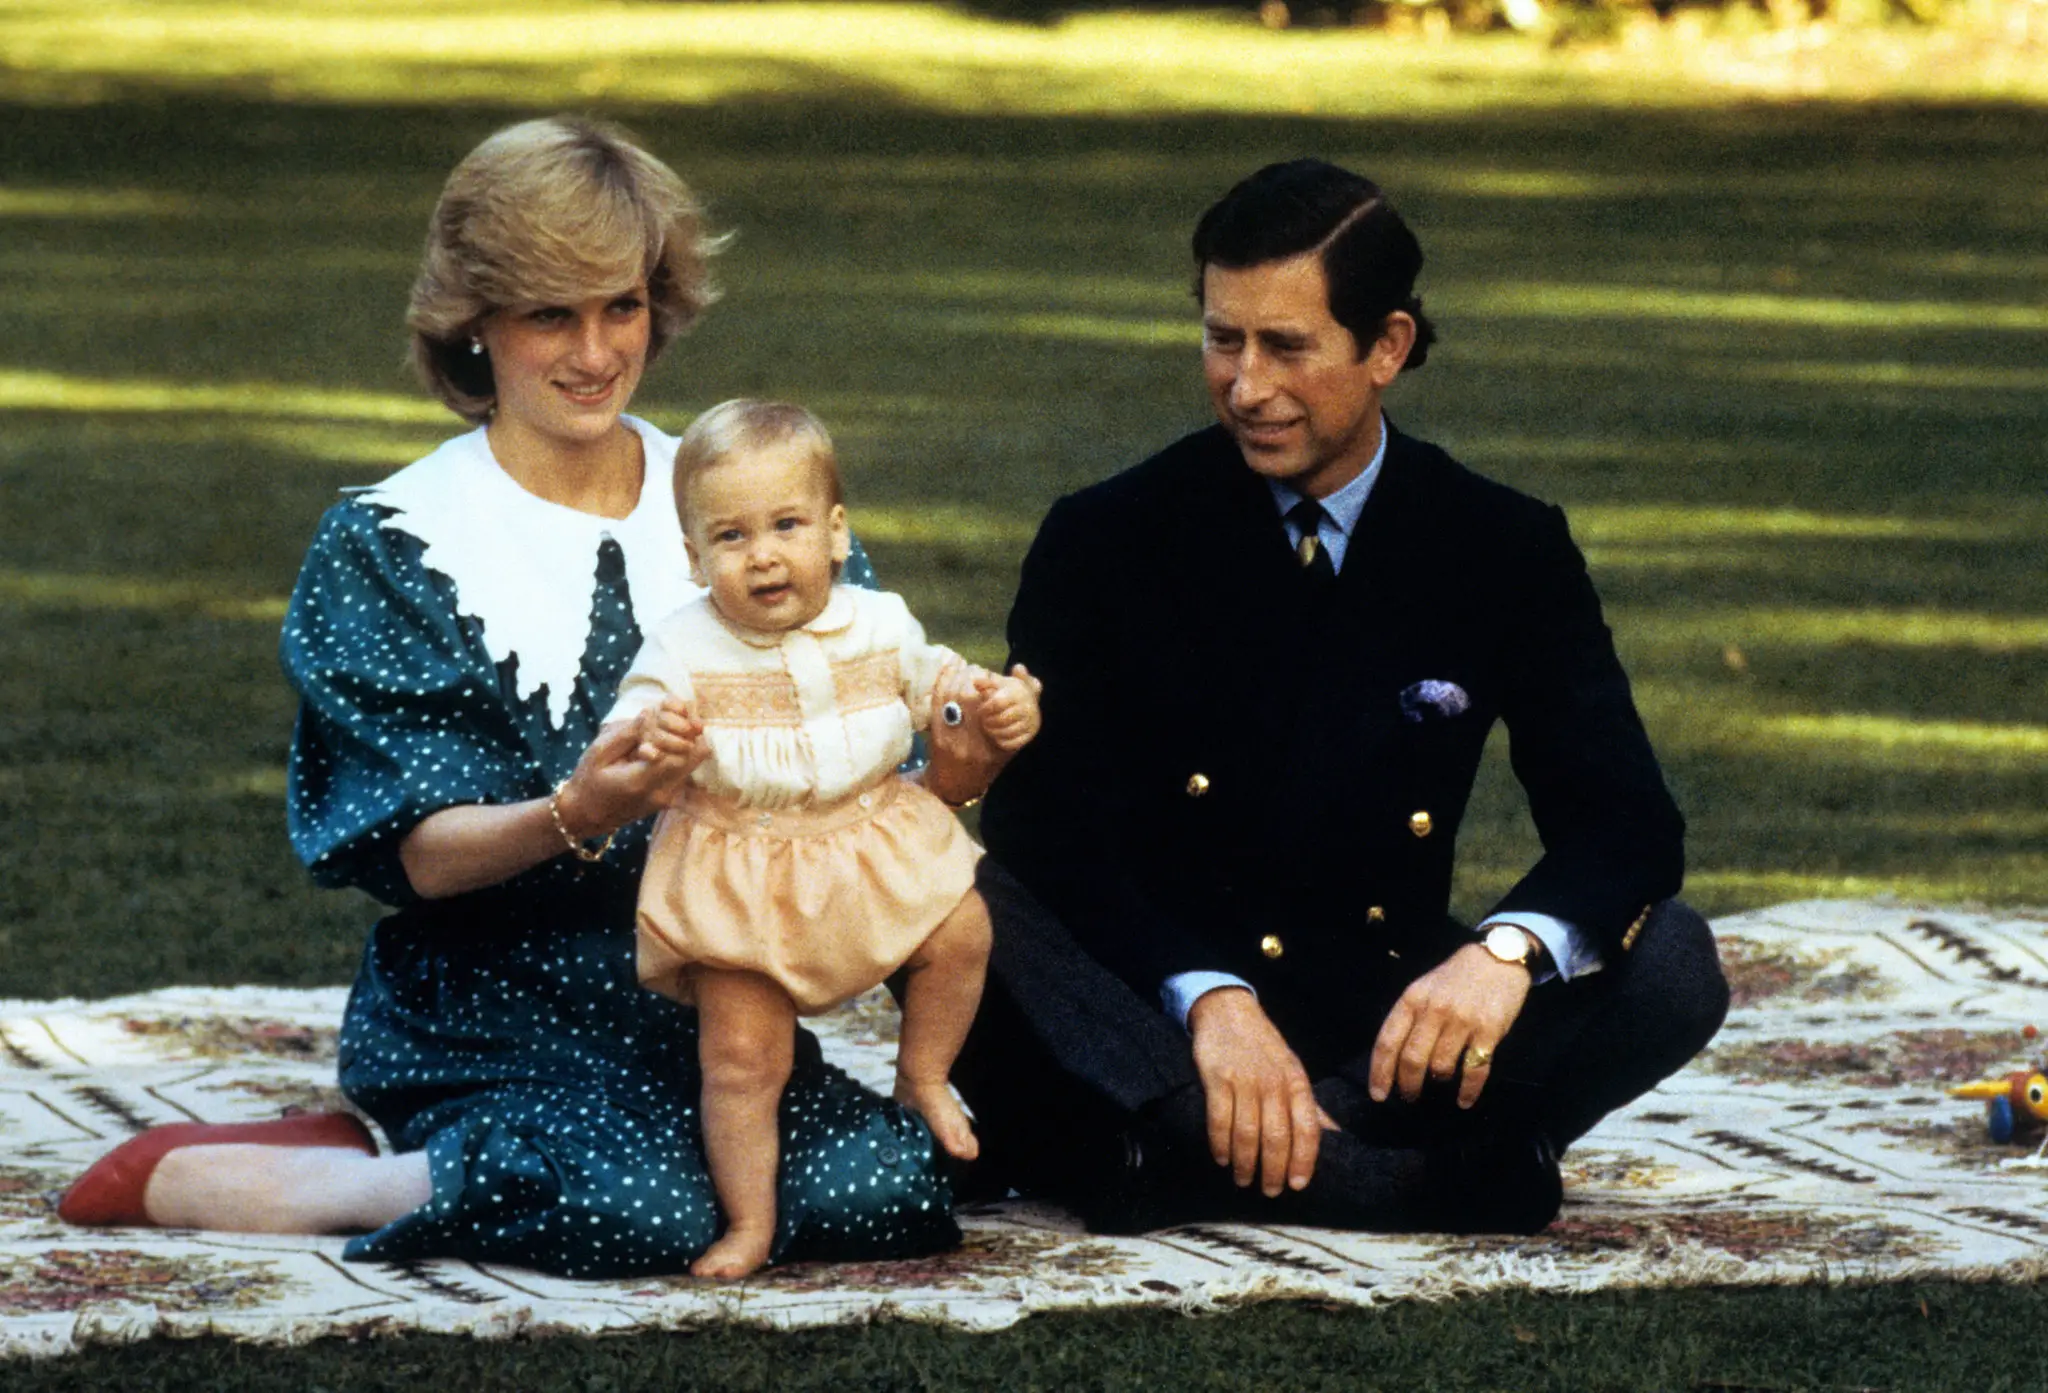 The oldest son of Prince Charles, the Prince of Wales and the late Diana, Princess of Wales Prince William was born on 21 June 1982